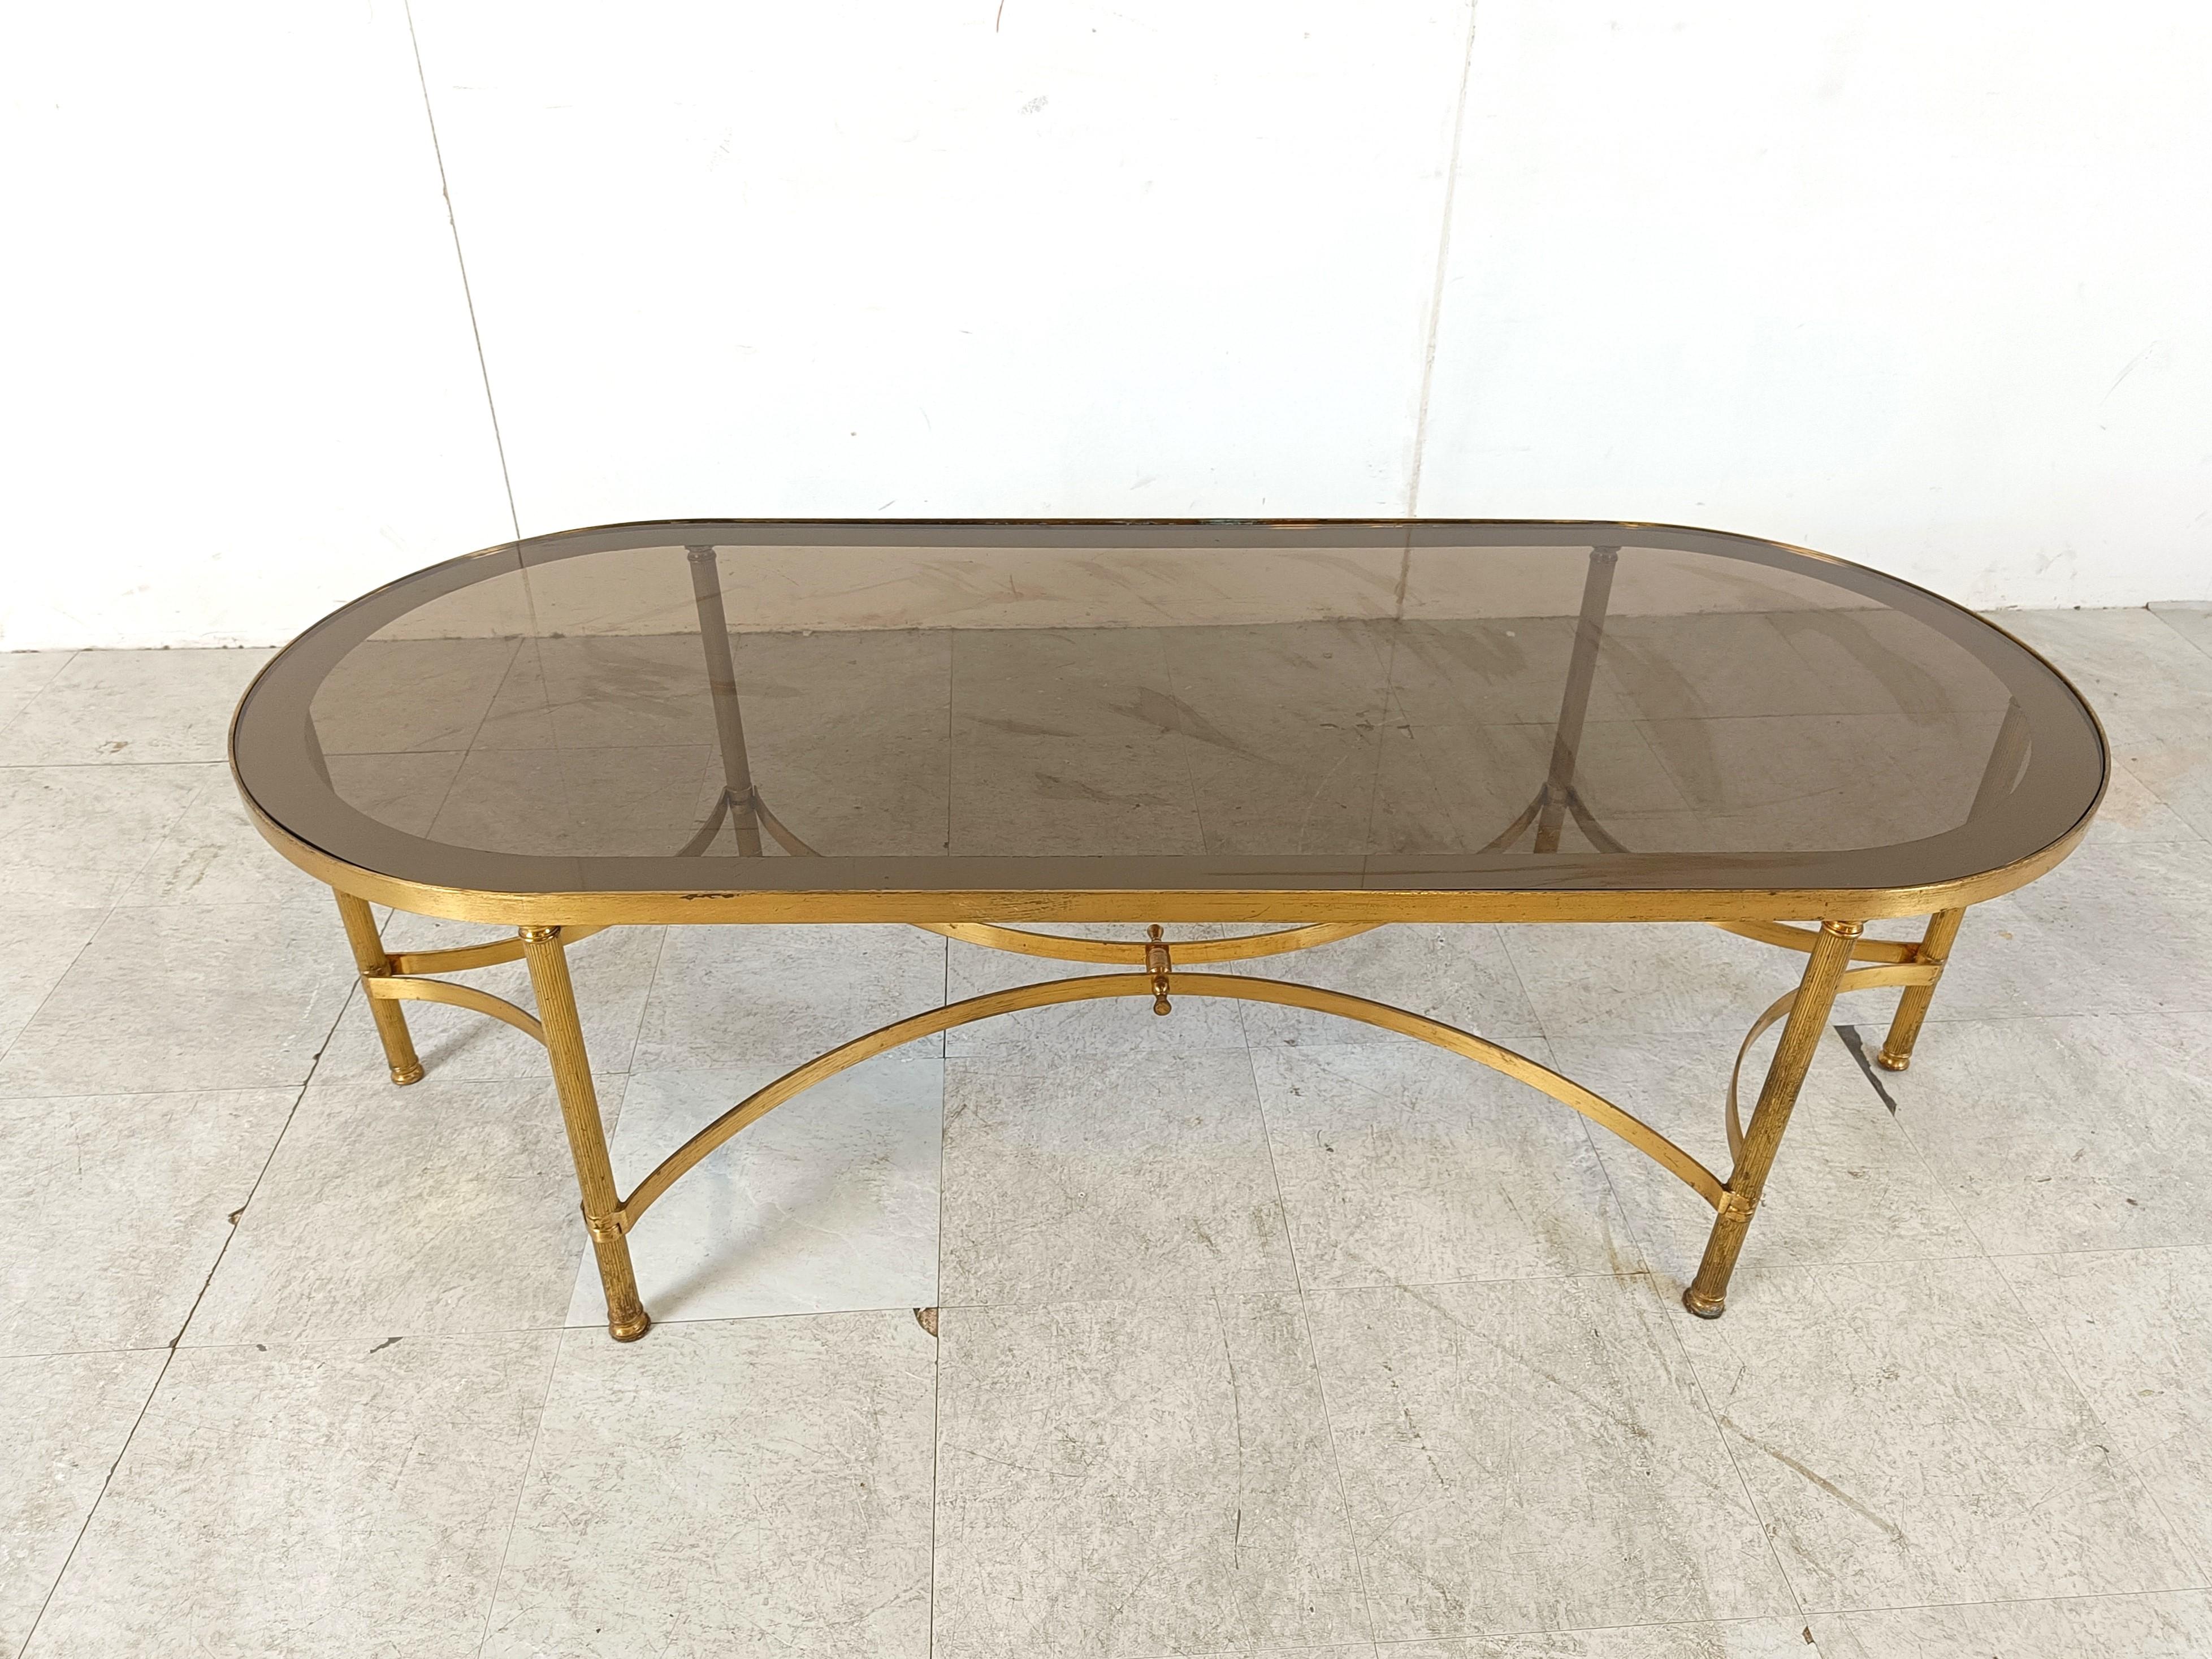 
Neoclassical oval coffee table with a gilt metal frame and smoked glass top in the manner of Maison Jansen.

Playful design with the bent metal between the legs.

1960s - France

Good condition

Dimensions:
Height: 46cm/18.11”
Width: